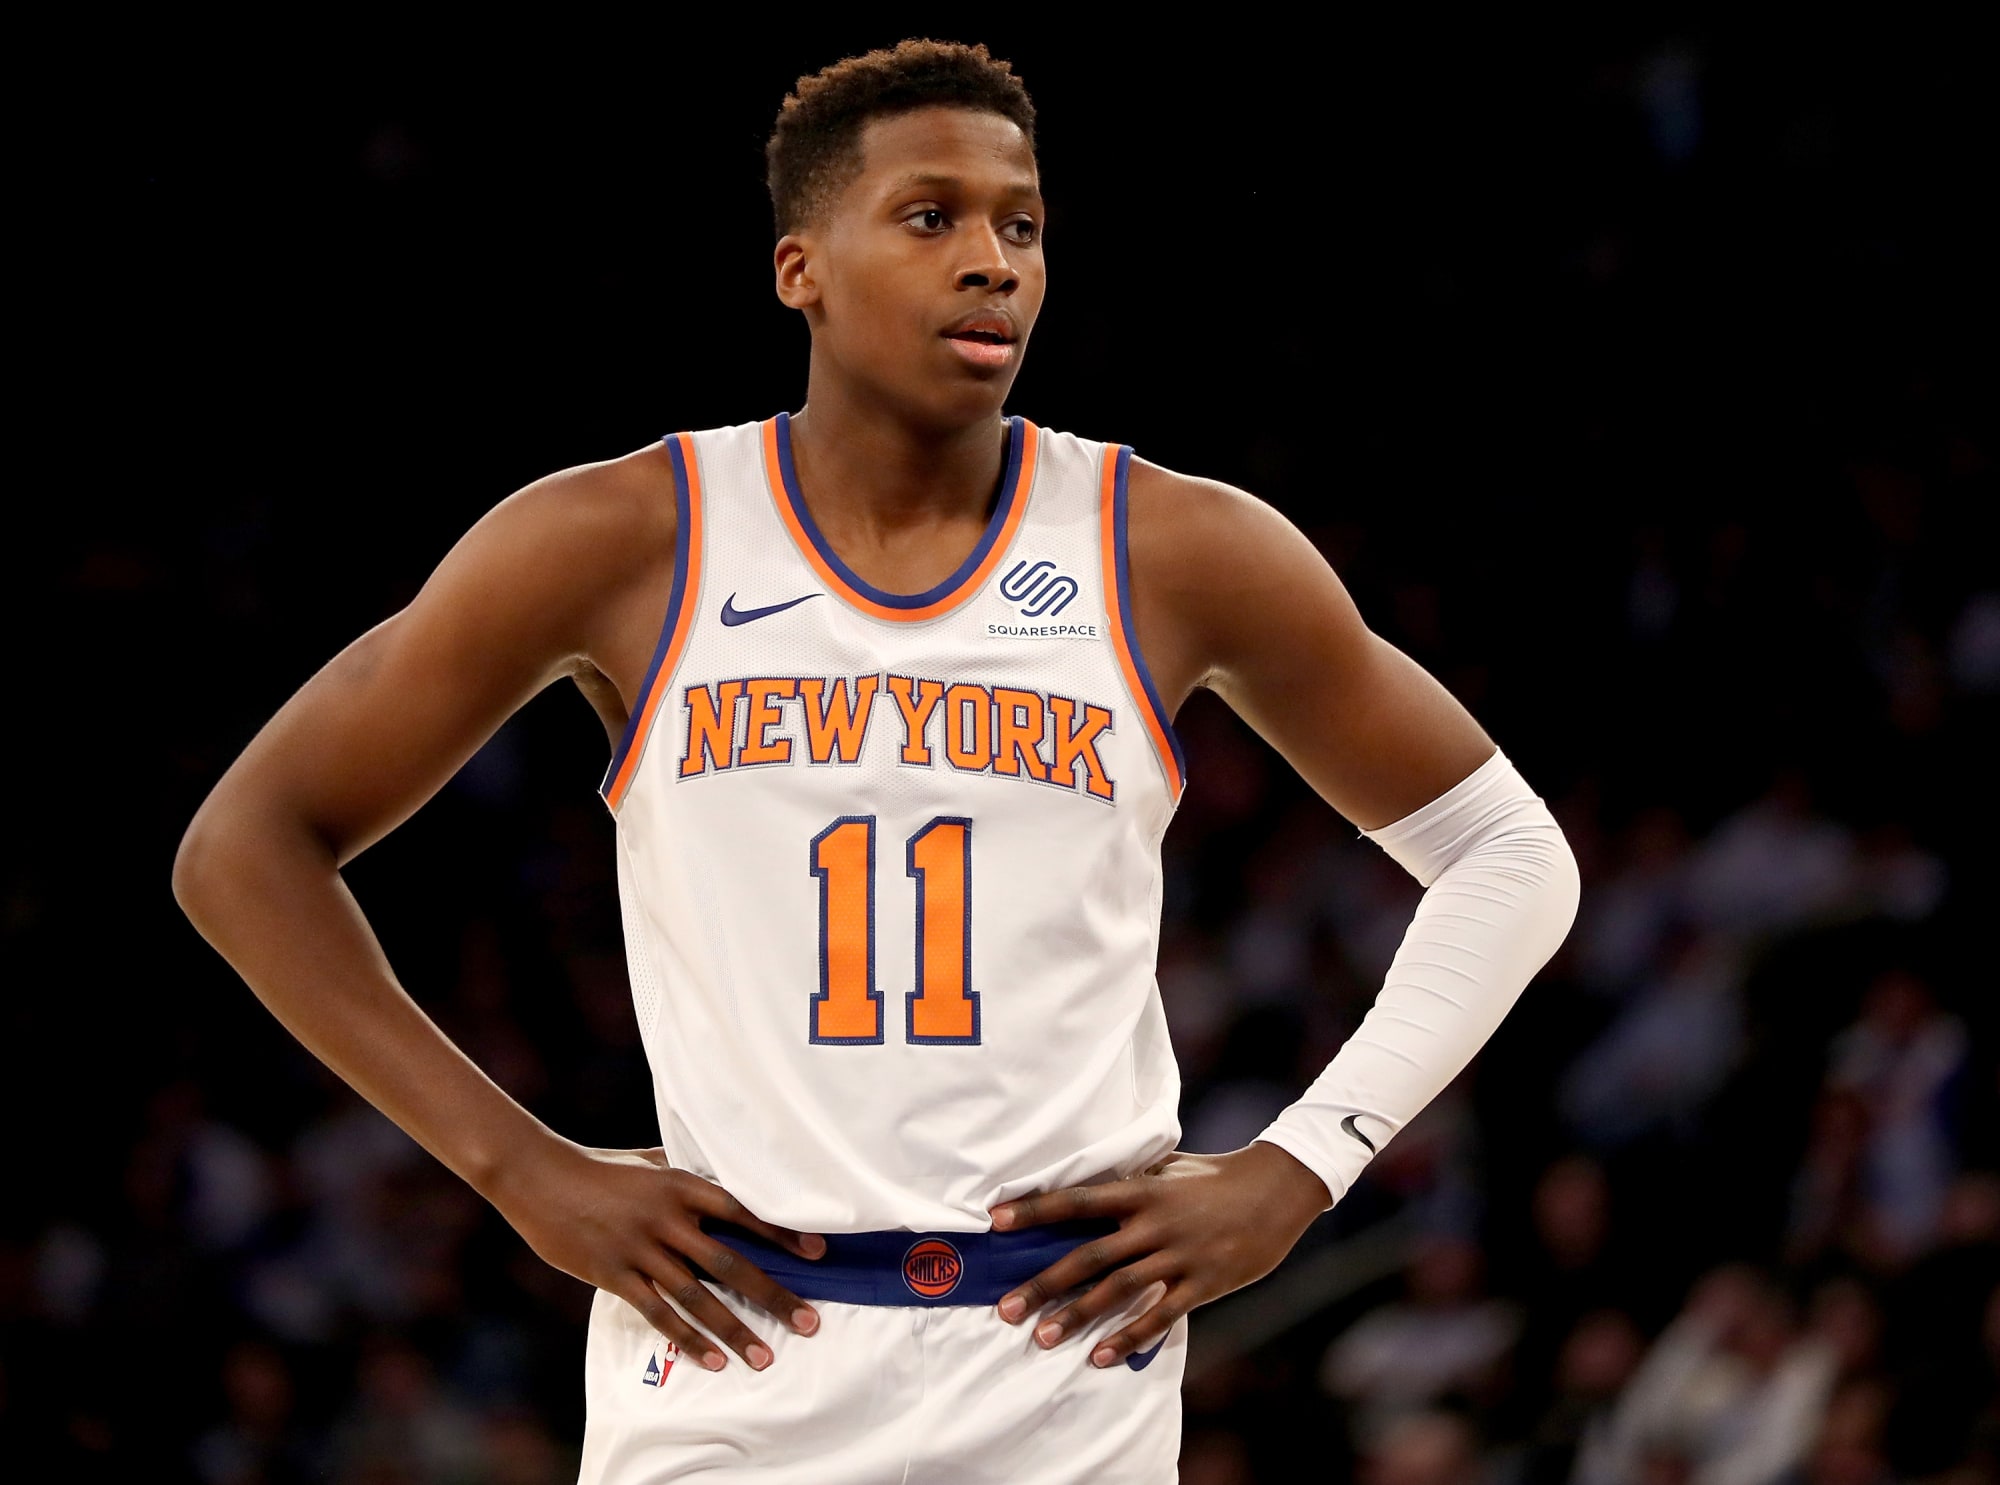 Frank Ntilikina Looking to be More Aggressive in Year 2, New York Knicks